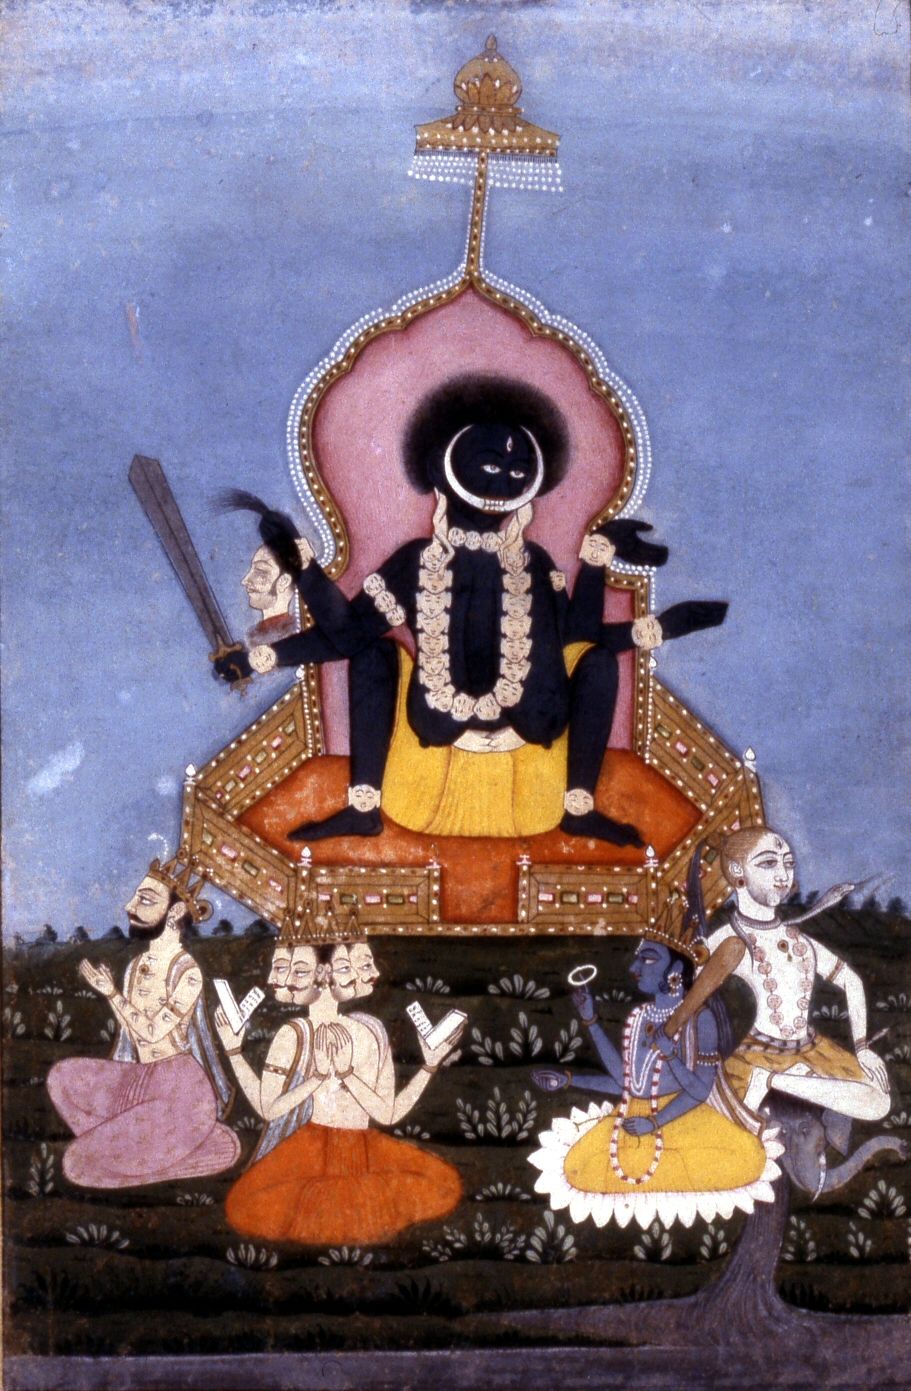 Drawing of Kali from 1900 at a Museum in Baltimore